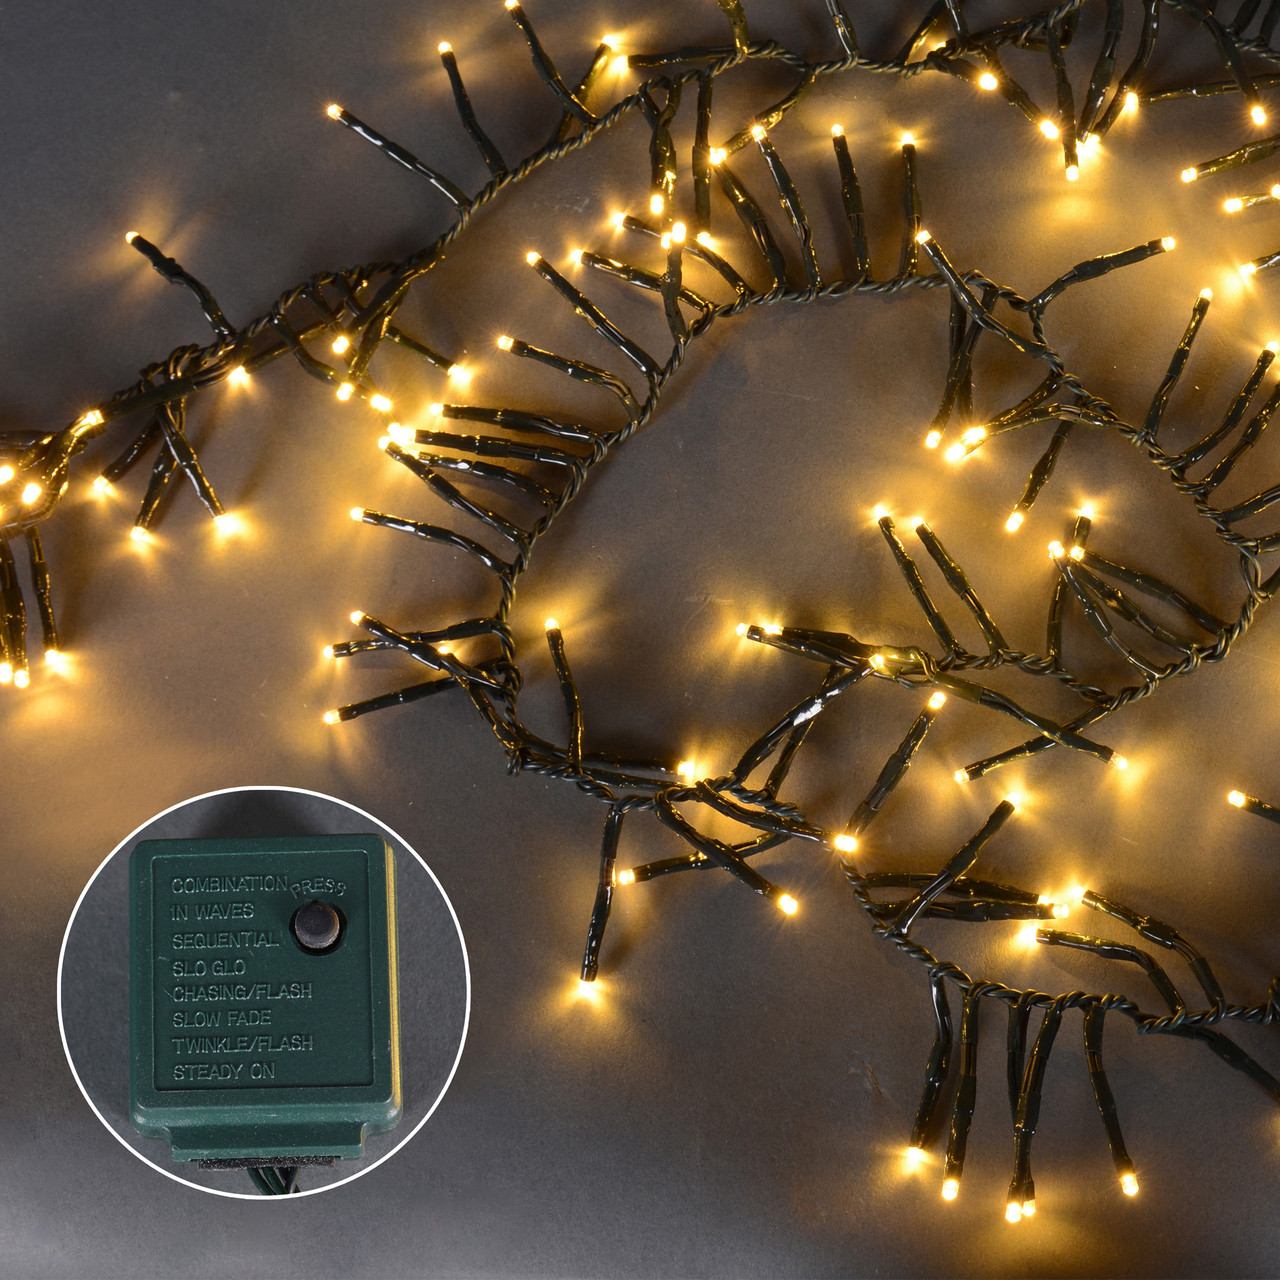 200 Warm White Multi Function Led Cluster Christmas Lights 5 75 Ft Green Wire Christmas